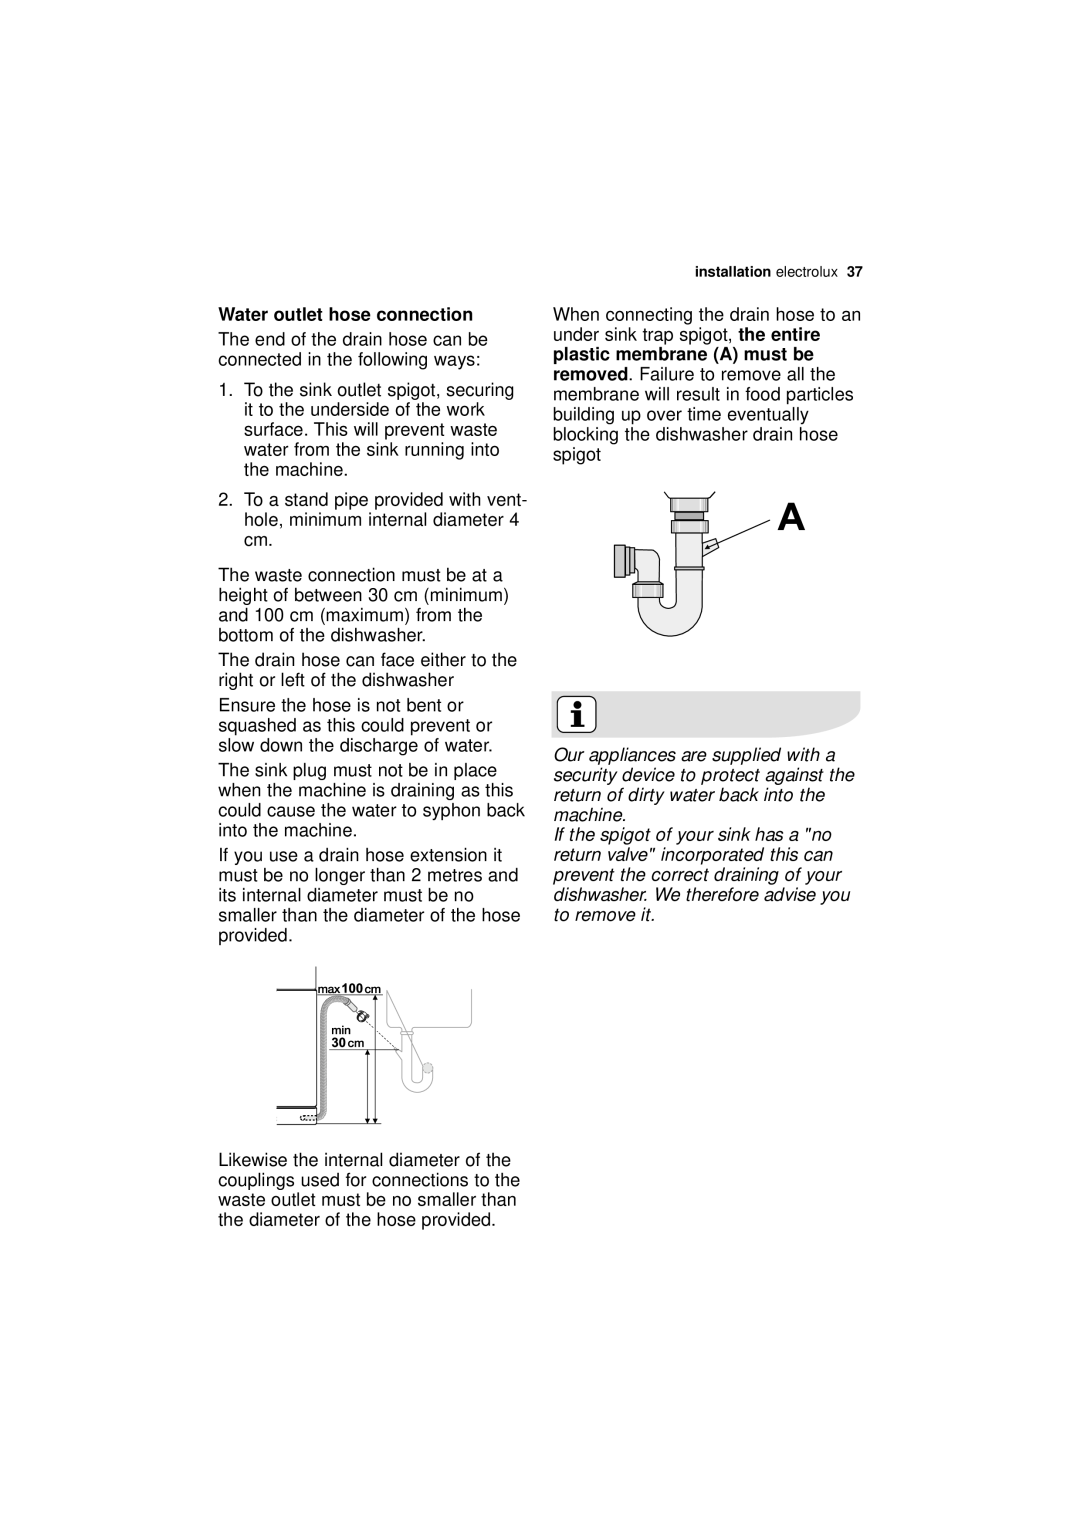 Electrolux ESI 63010 user manual Water outlet hose connection, plastic membrane A must be 